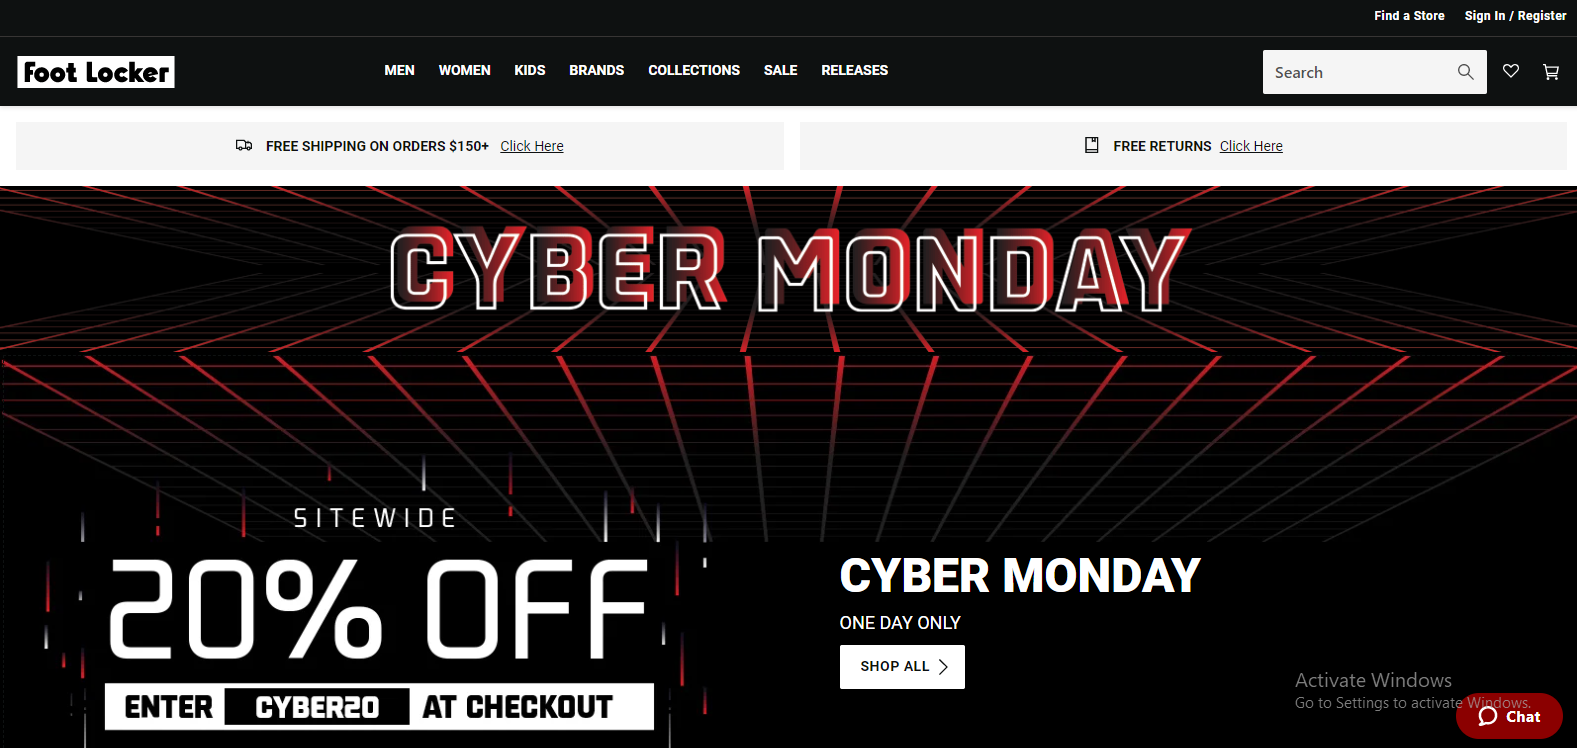 Foot Locker Cyber Monday extra 20% OFF sitewide with promo code including Nike, Adidas, Jordan &more